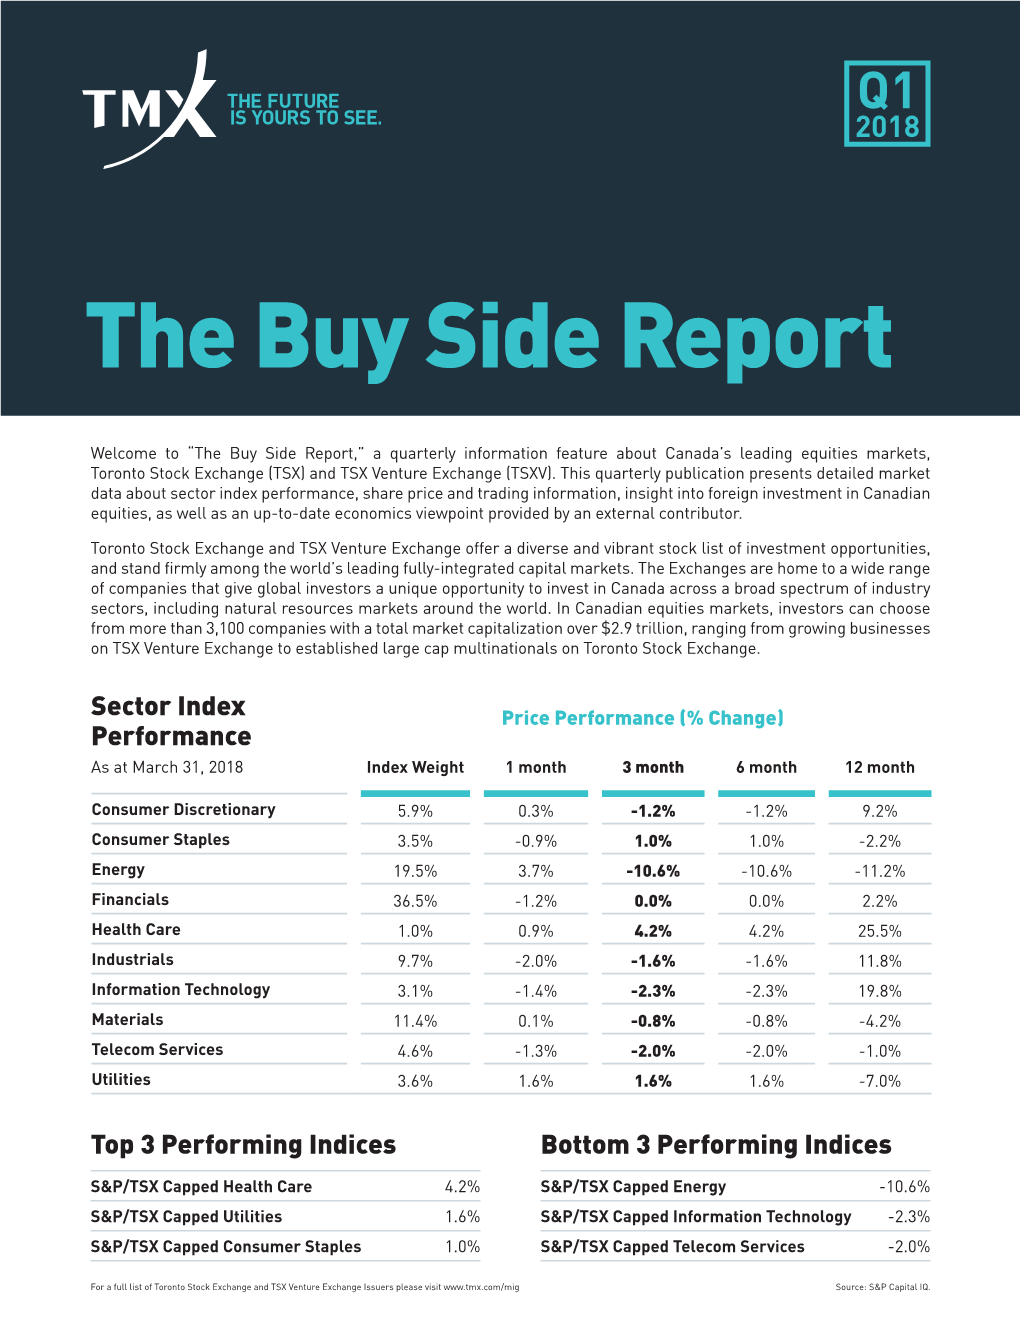 The Buy Side Report